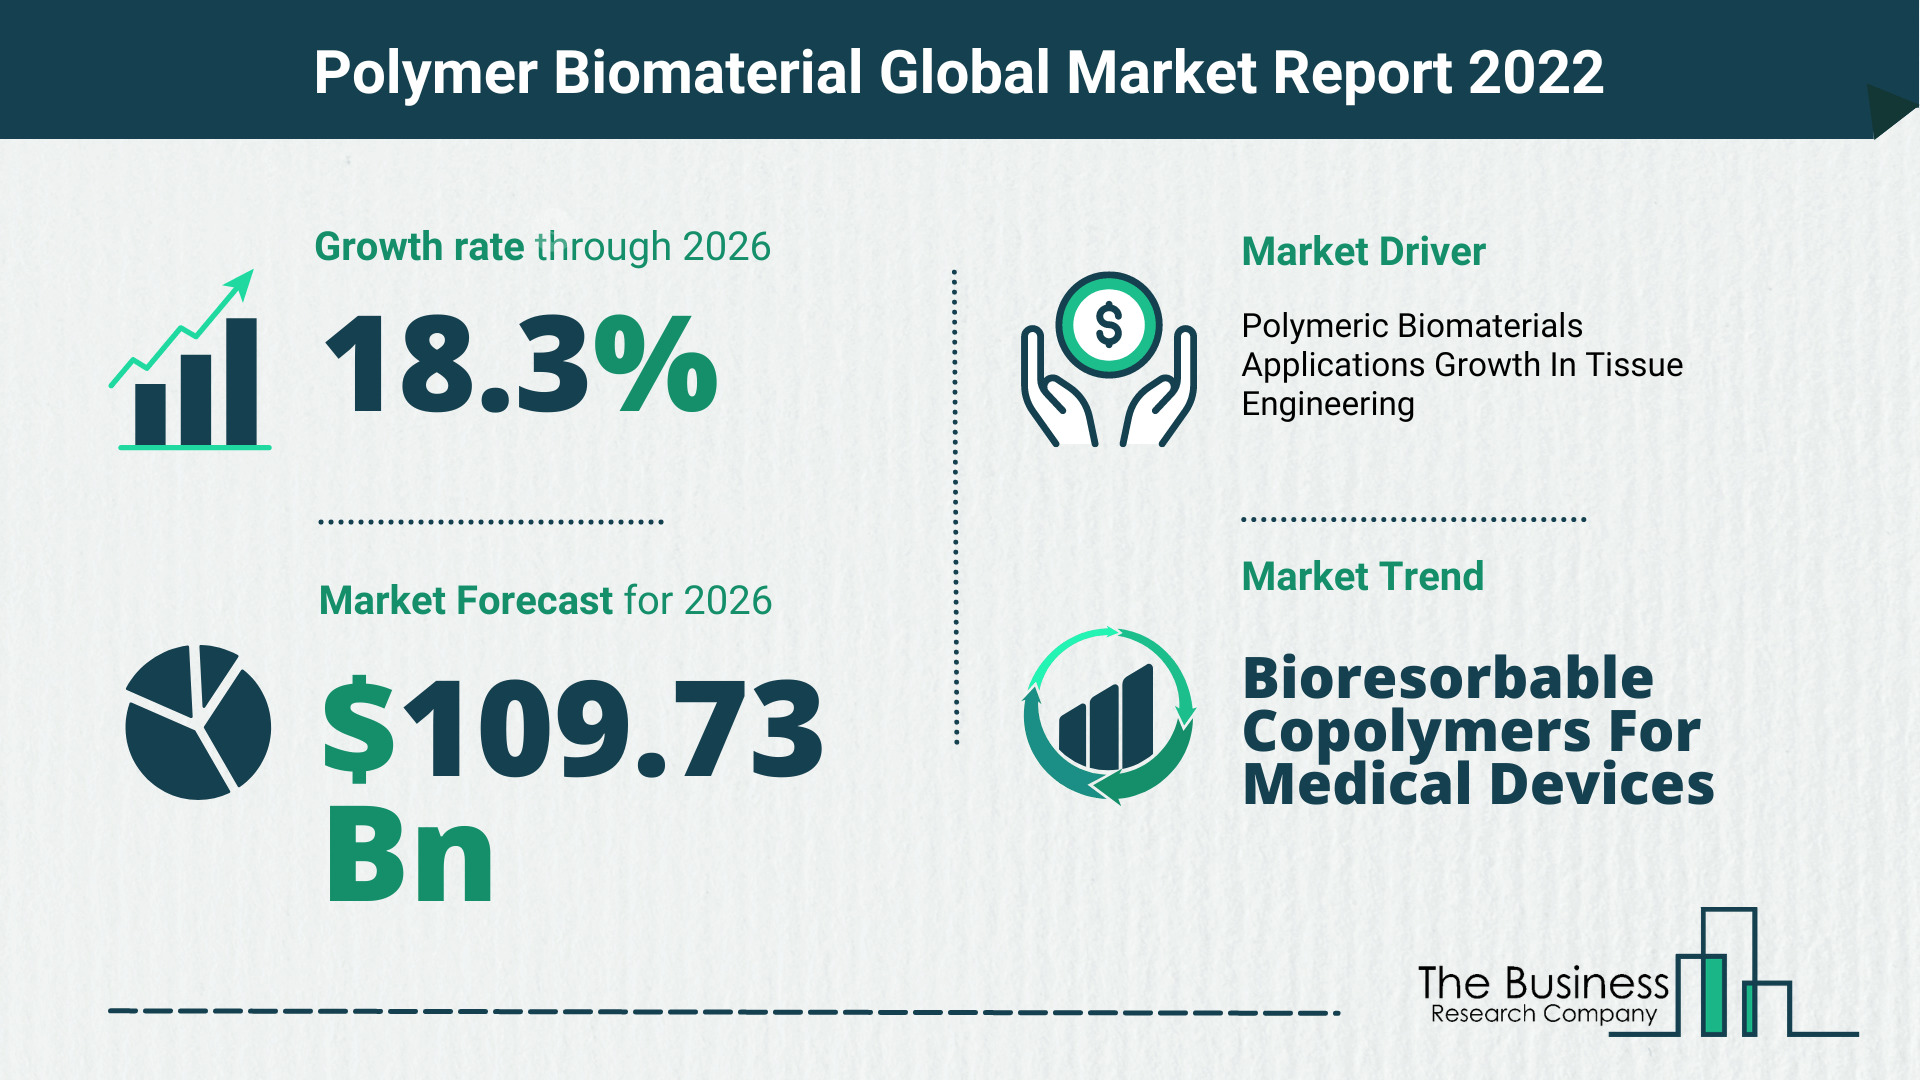 Latest Polymer Biomaterial Market Growth Study 2022-2026 By The Business Research Company